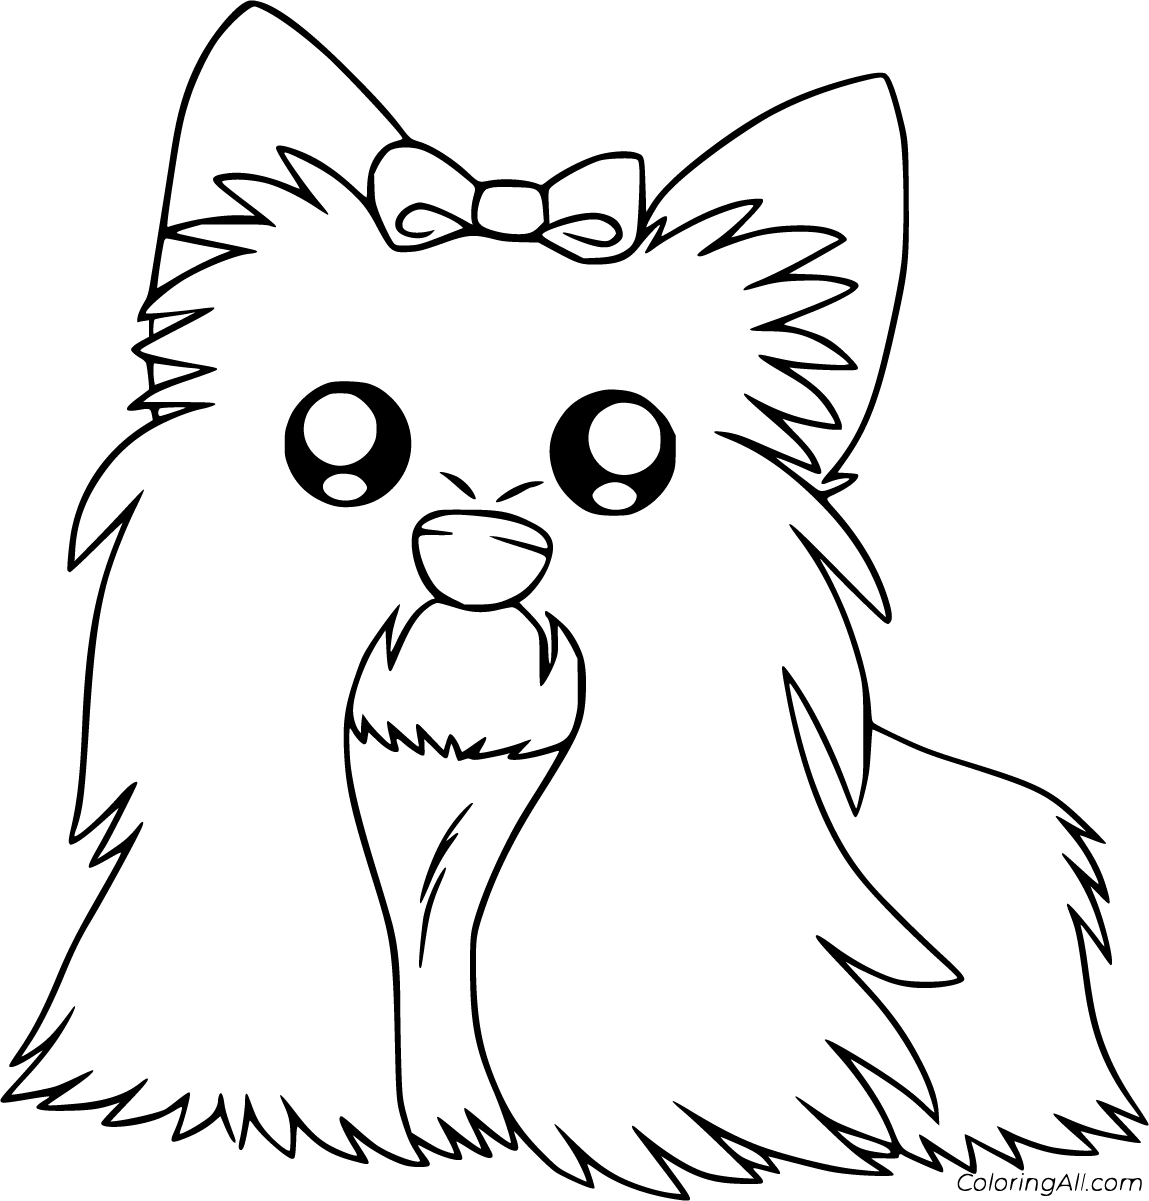 Yorkie Coloring Pages   ColoringAll